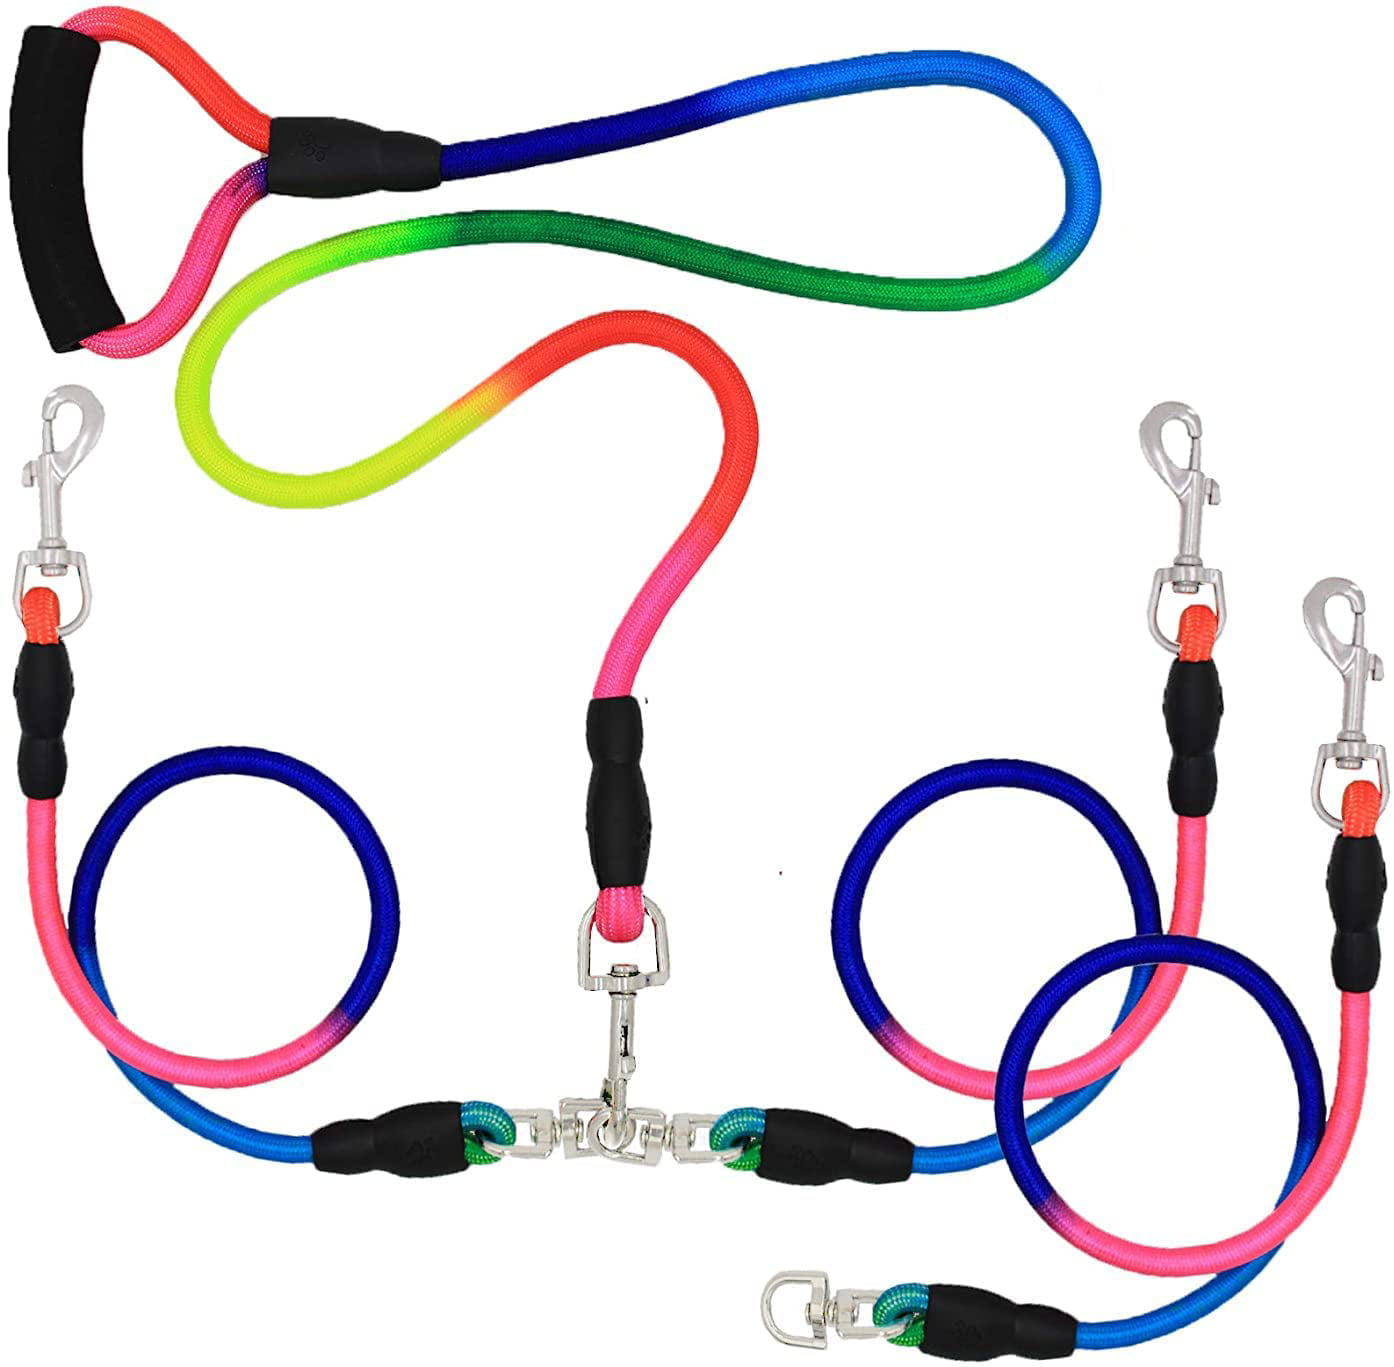 Double Dog Leash No Tangle with Adjustable Coupler & Soft Padded Handle for 2 Dogs Small Medium Large Up to 100lbs. 